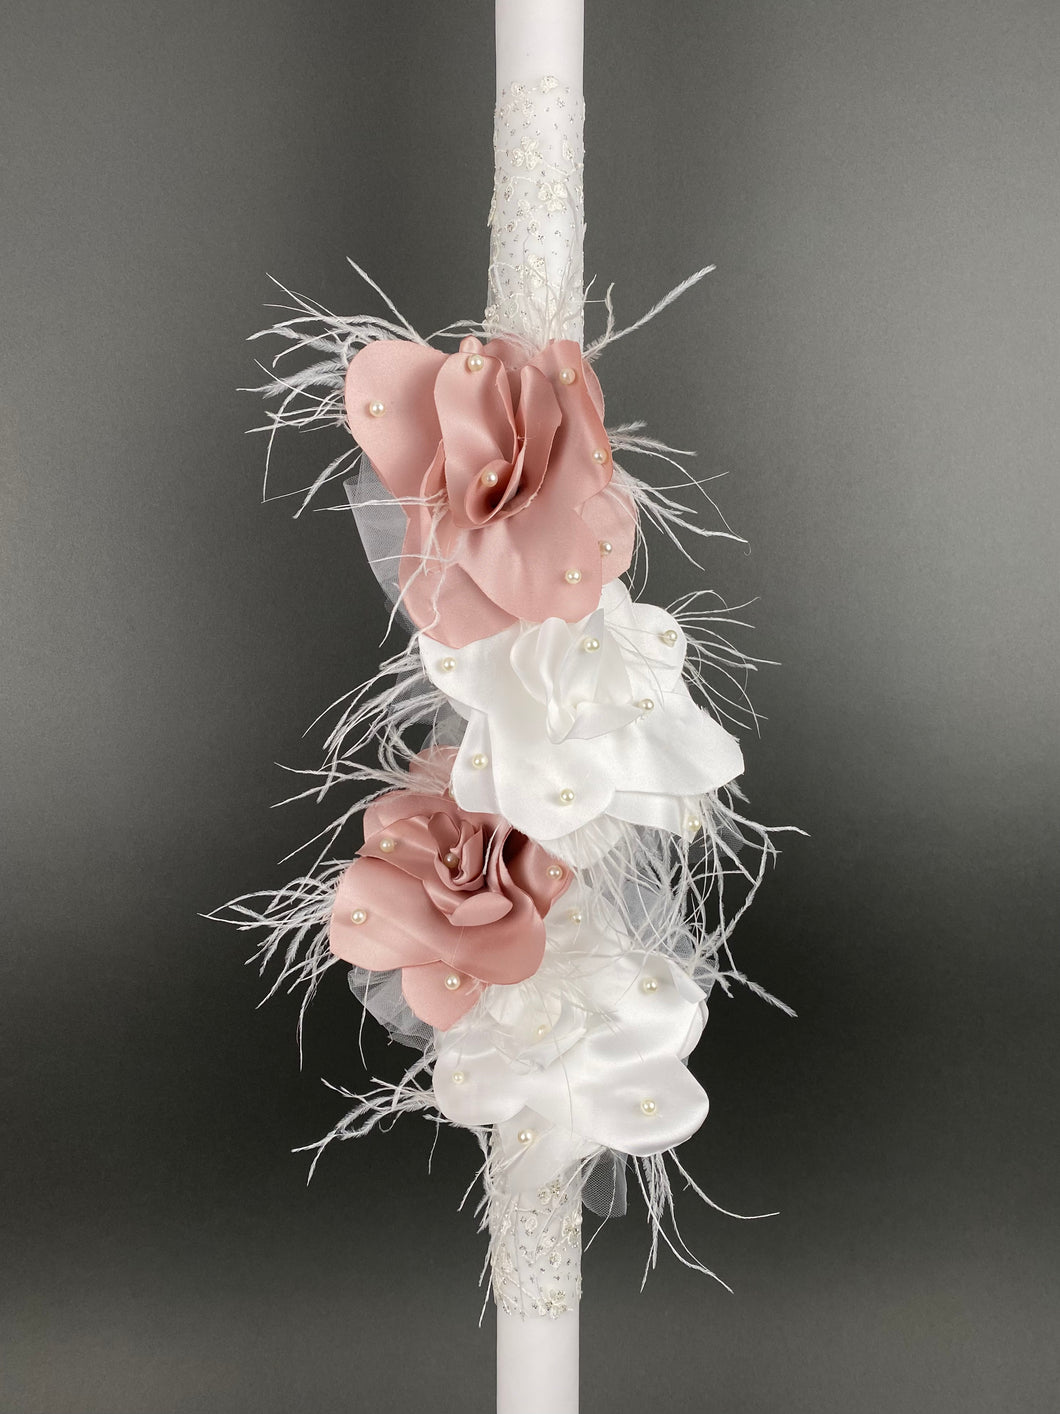 Glitter French Lace Wrapped 32” Baptismal Candle with Dusty Rose Flowers and Feathers GC202314